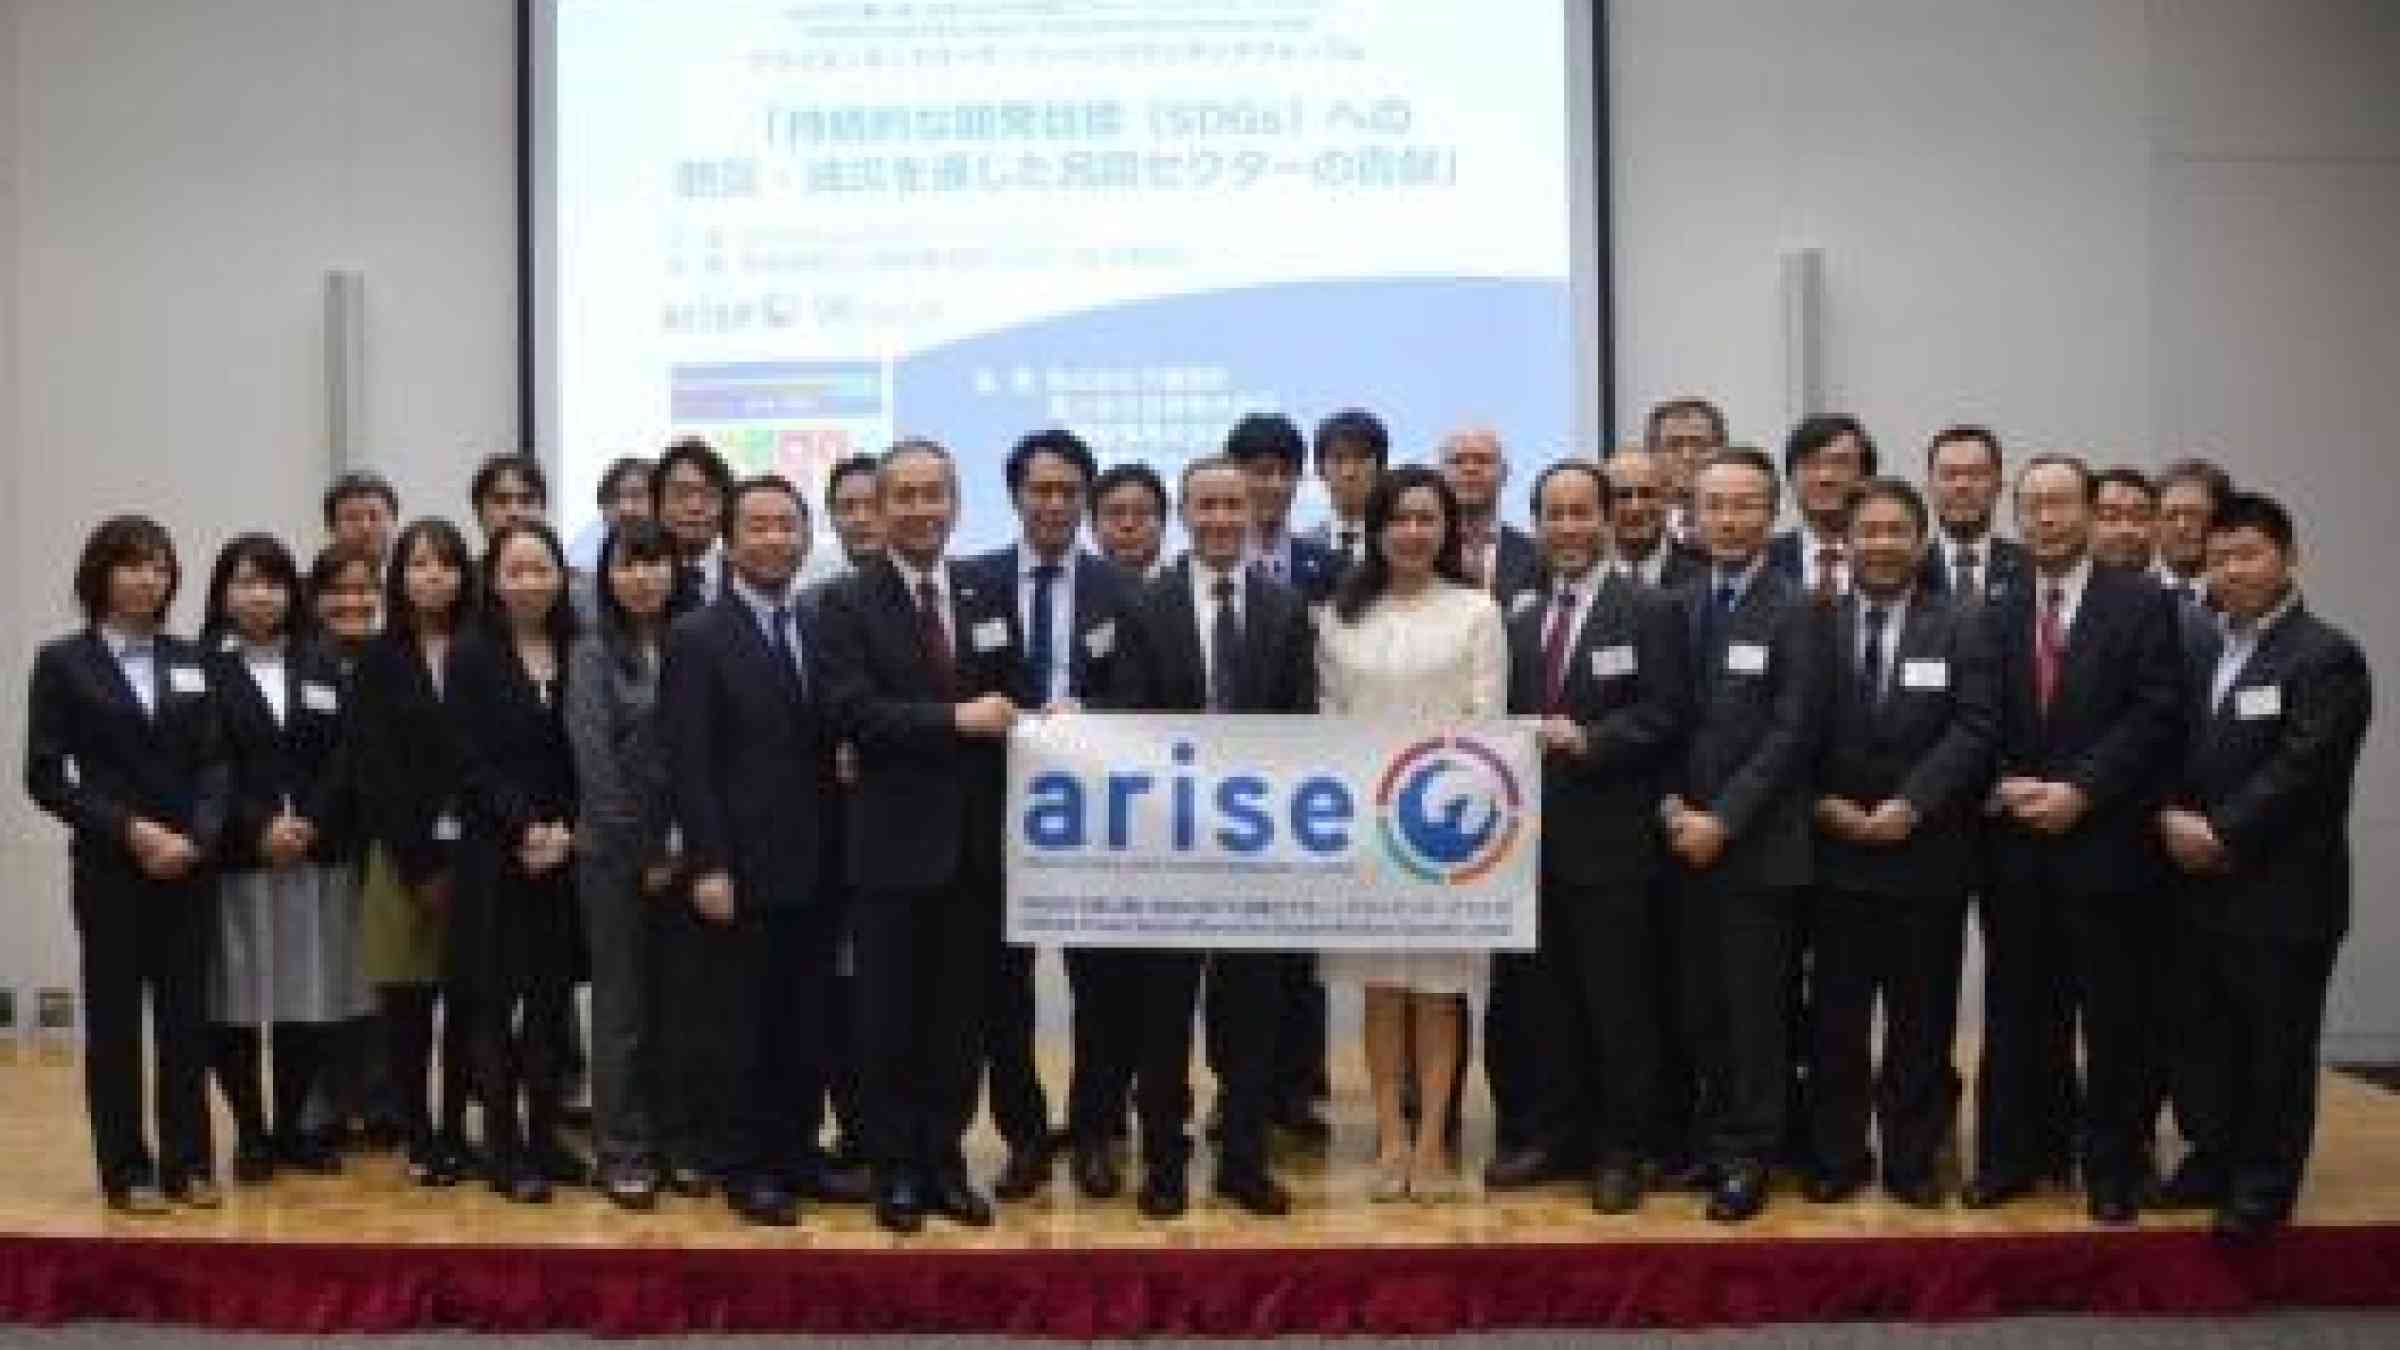 UNISDR Private Sector Alliance for Disaster Resilient Societies (ARISE) members in Japan pose for a photo with UNISDR’s head, Mr. Robert Glasser (Photo: UNISDR)